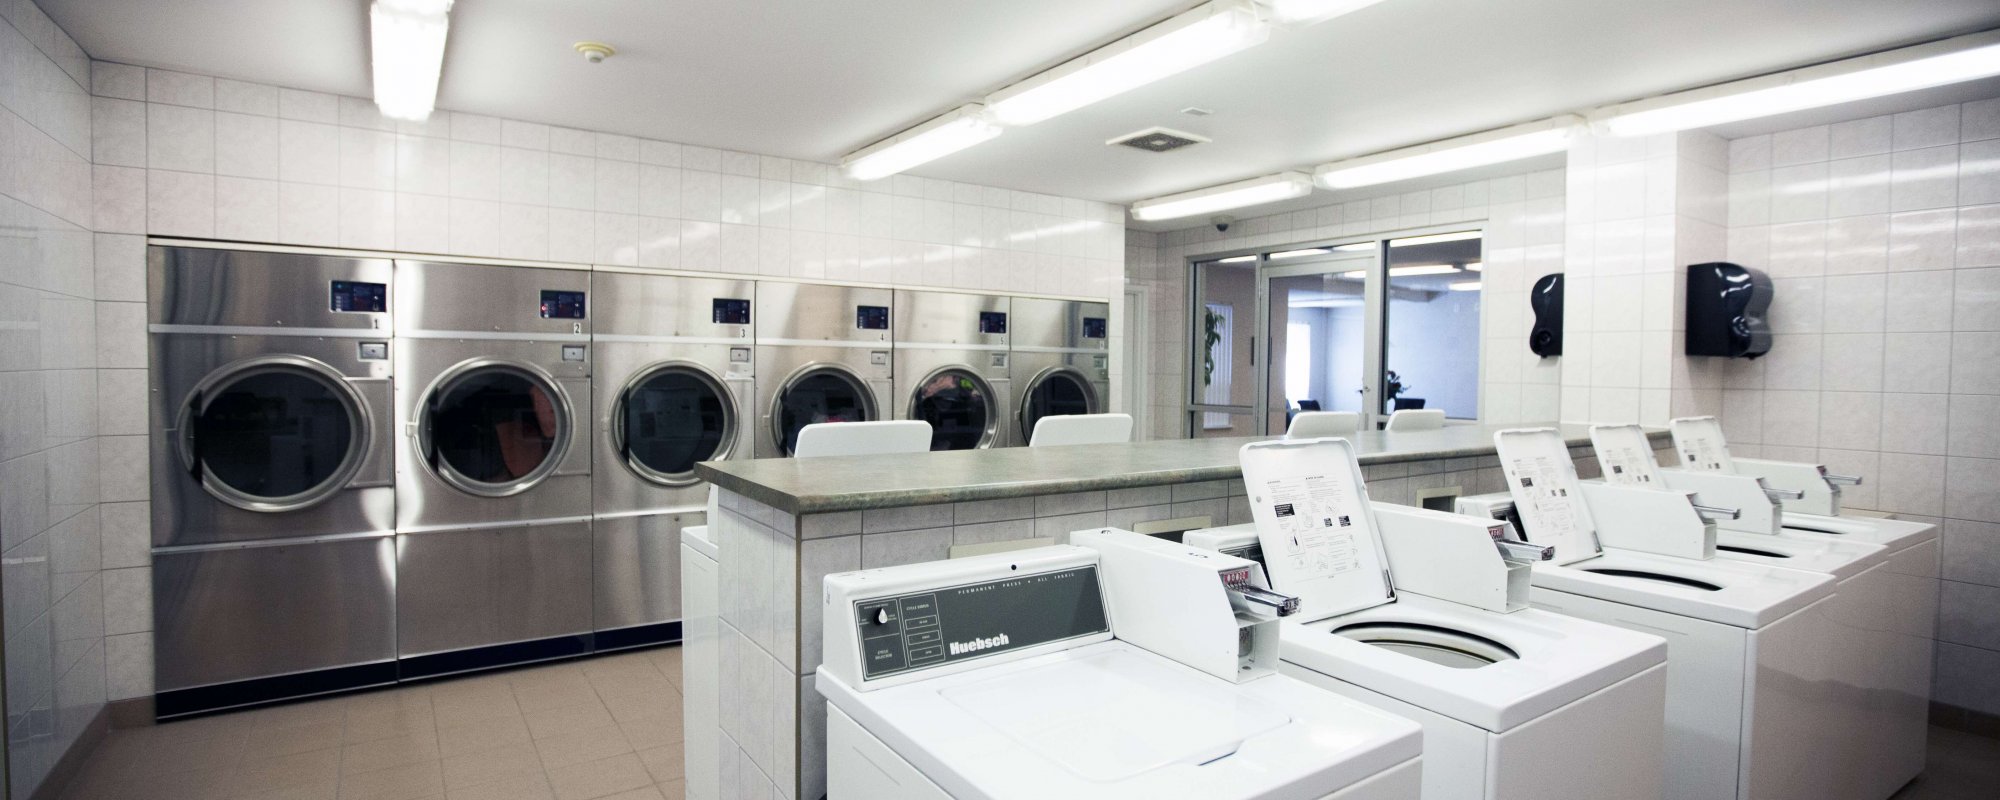 Laundry facilities at a Proudfoot Place apartment building